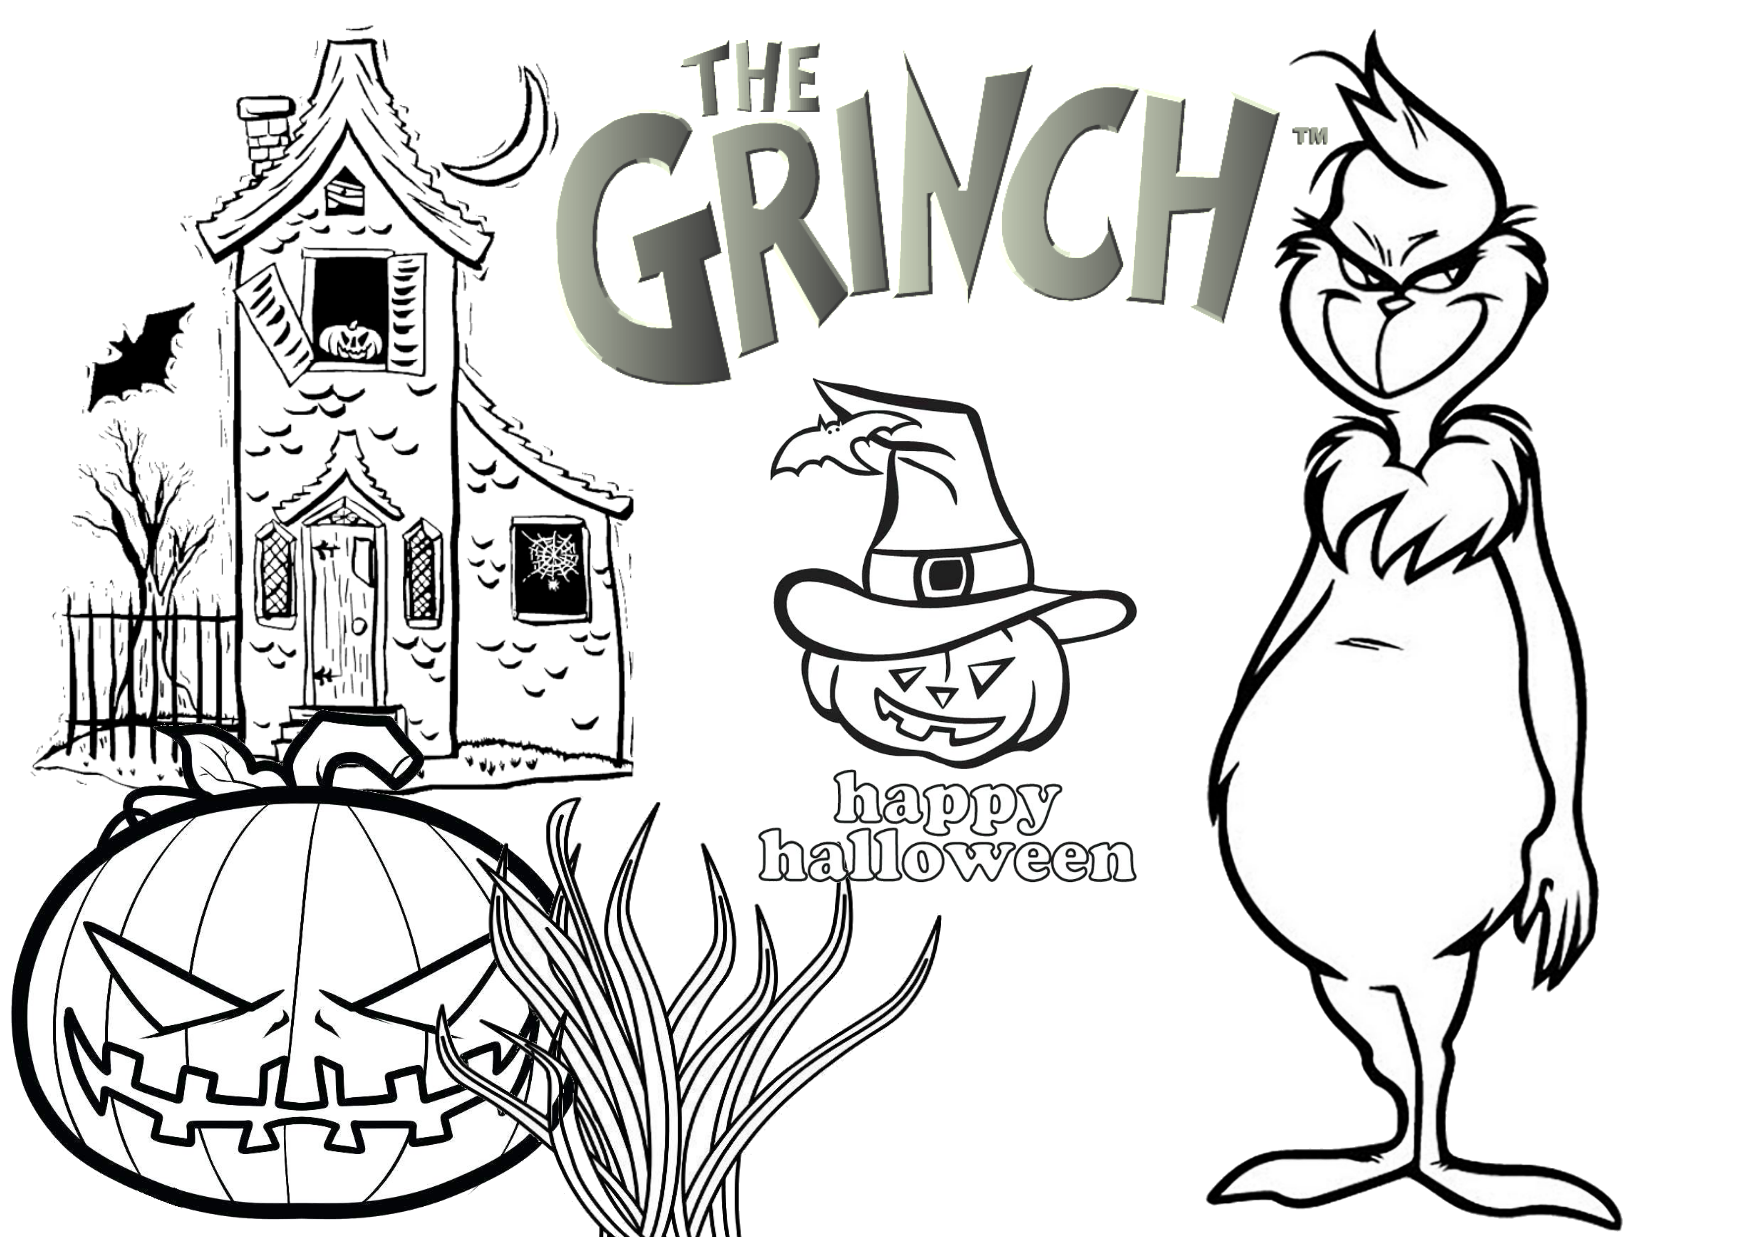 The grinch halloween free printable coloring page.